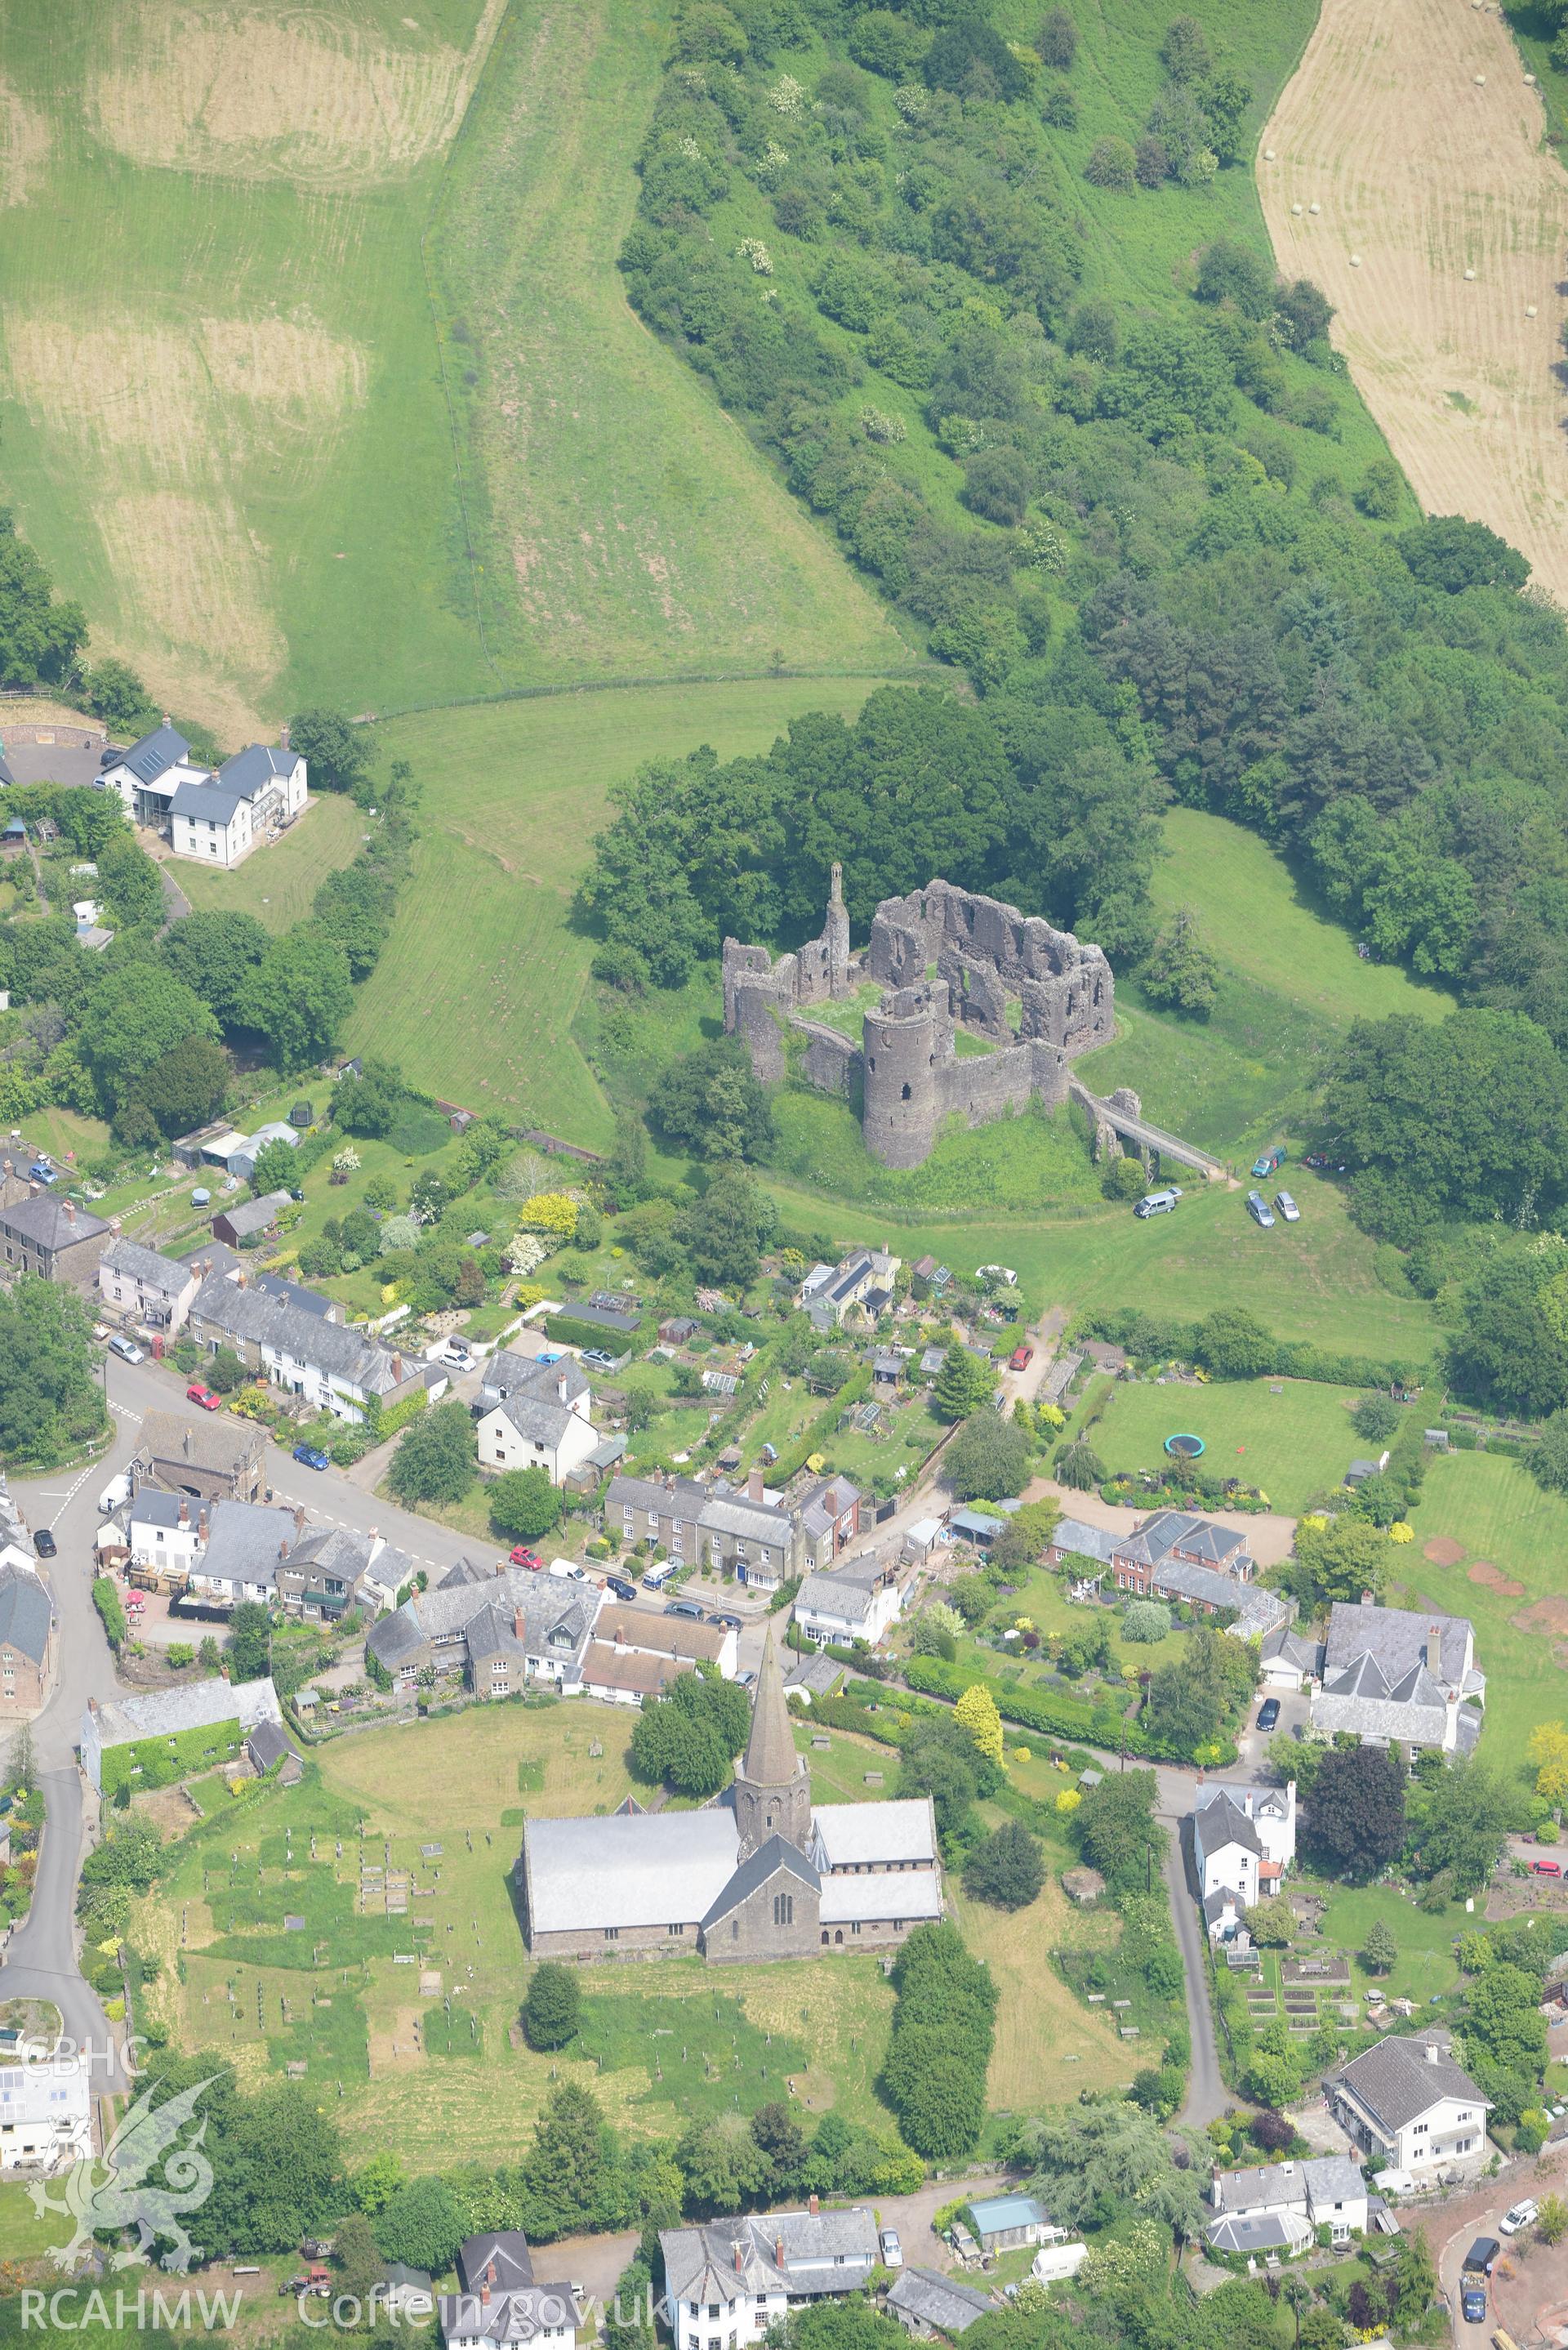 Grosmont village including views of the castle and St. Nicholas' church. Oblique aerial photograph taken during the Royal Commission's programme of archaeological aerial reconnaissance by Toby Driver on 11th June 2015.